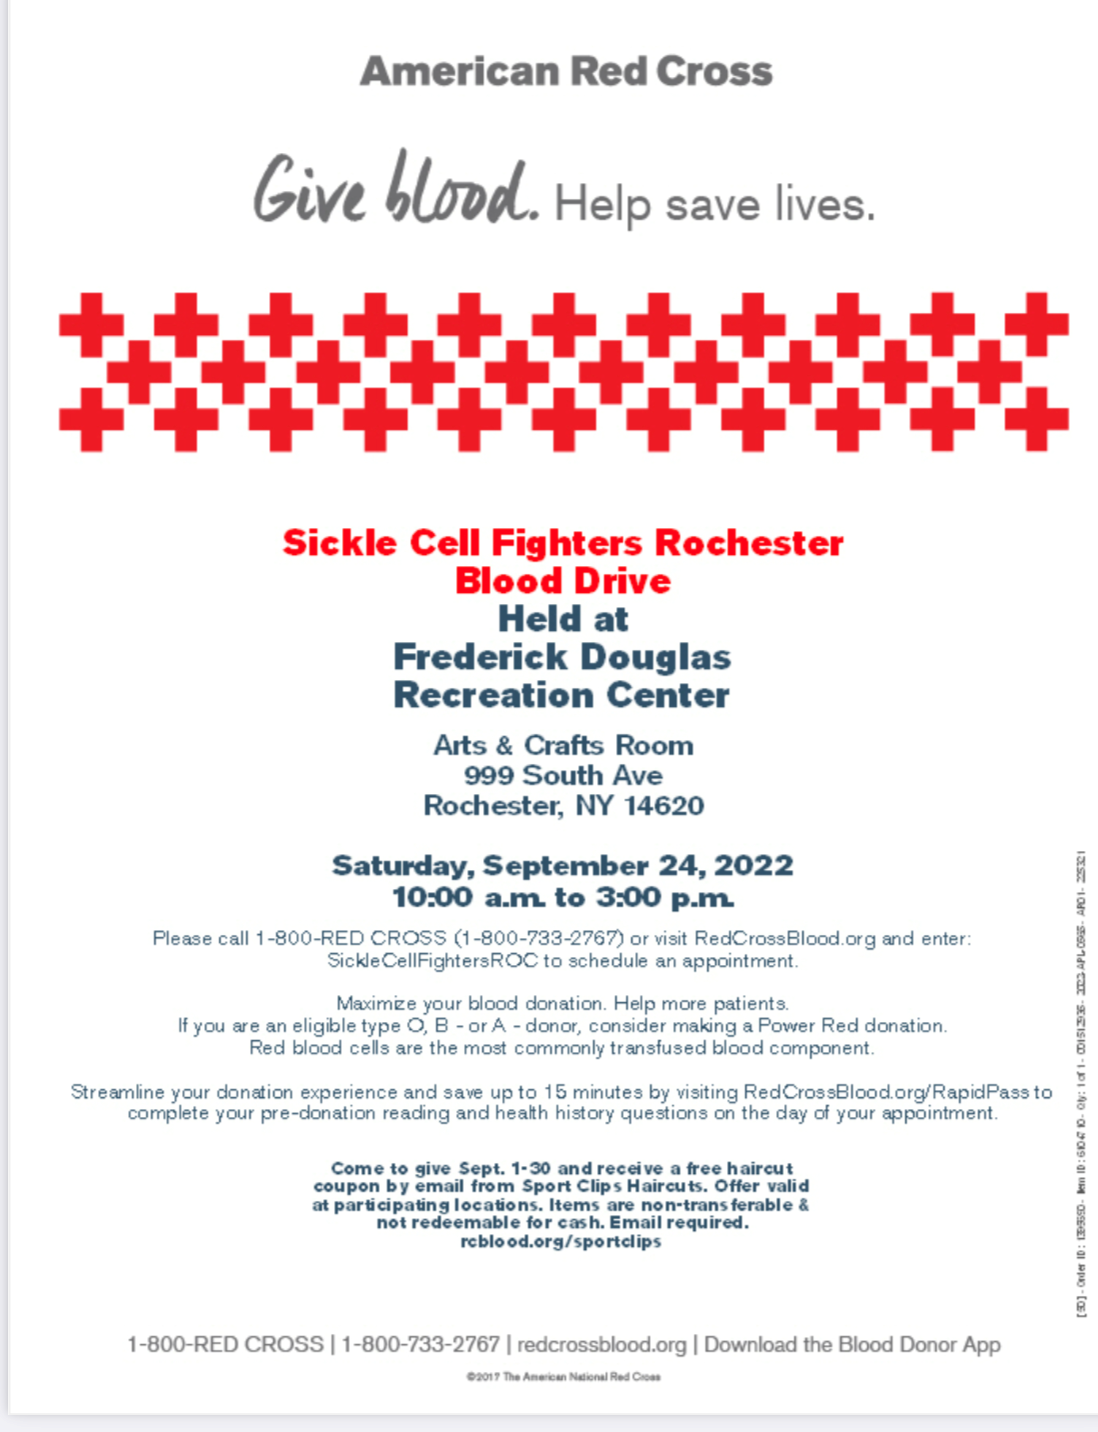 Sickle Cell Fighters Rochester Blood Drive 